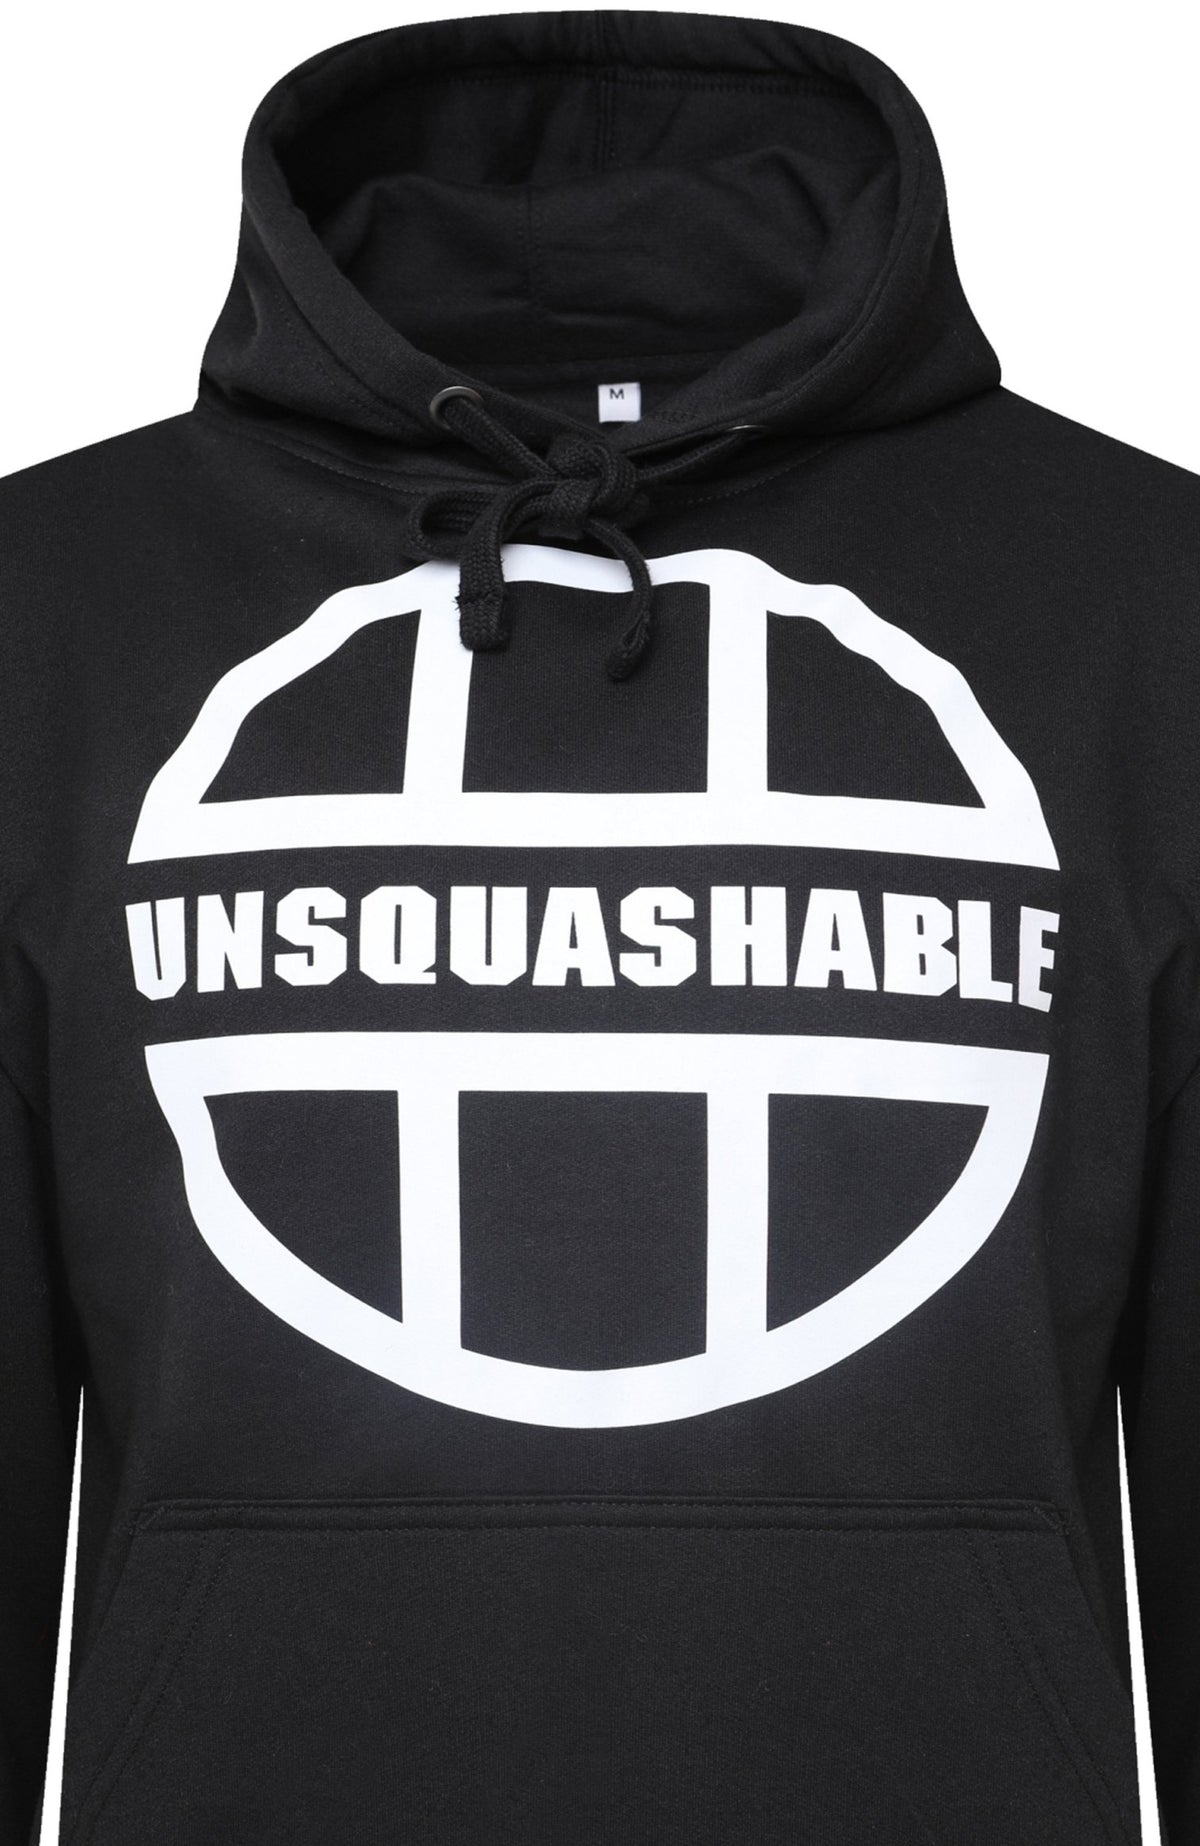 UNSQUASHABLE Original Hoodie - black and white logo zoomed in on logo